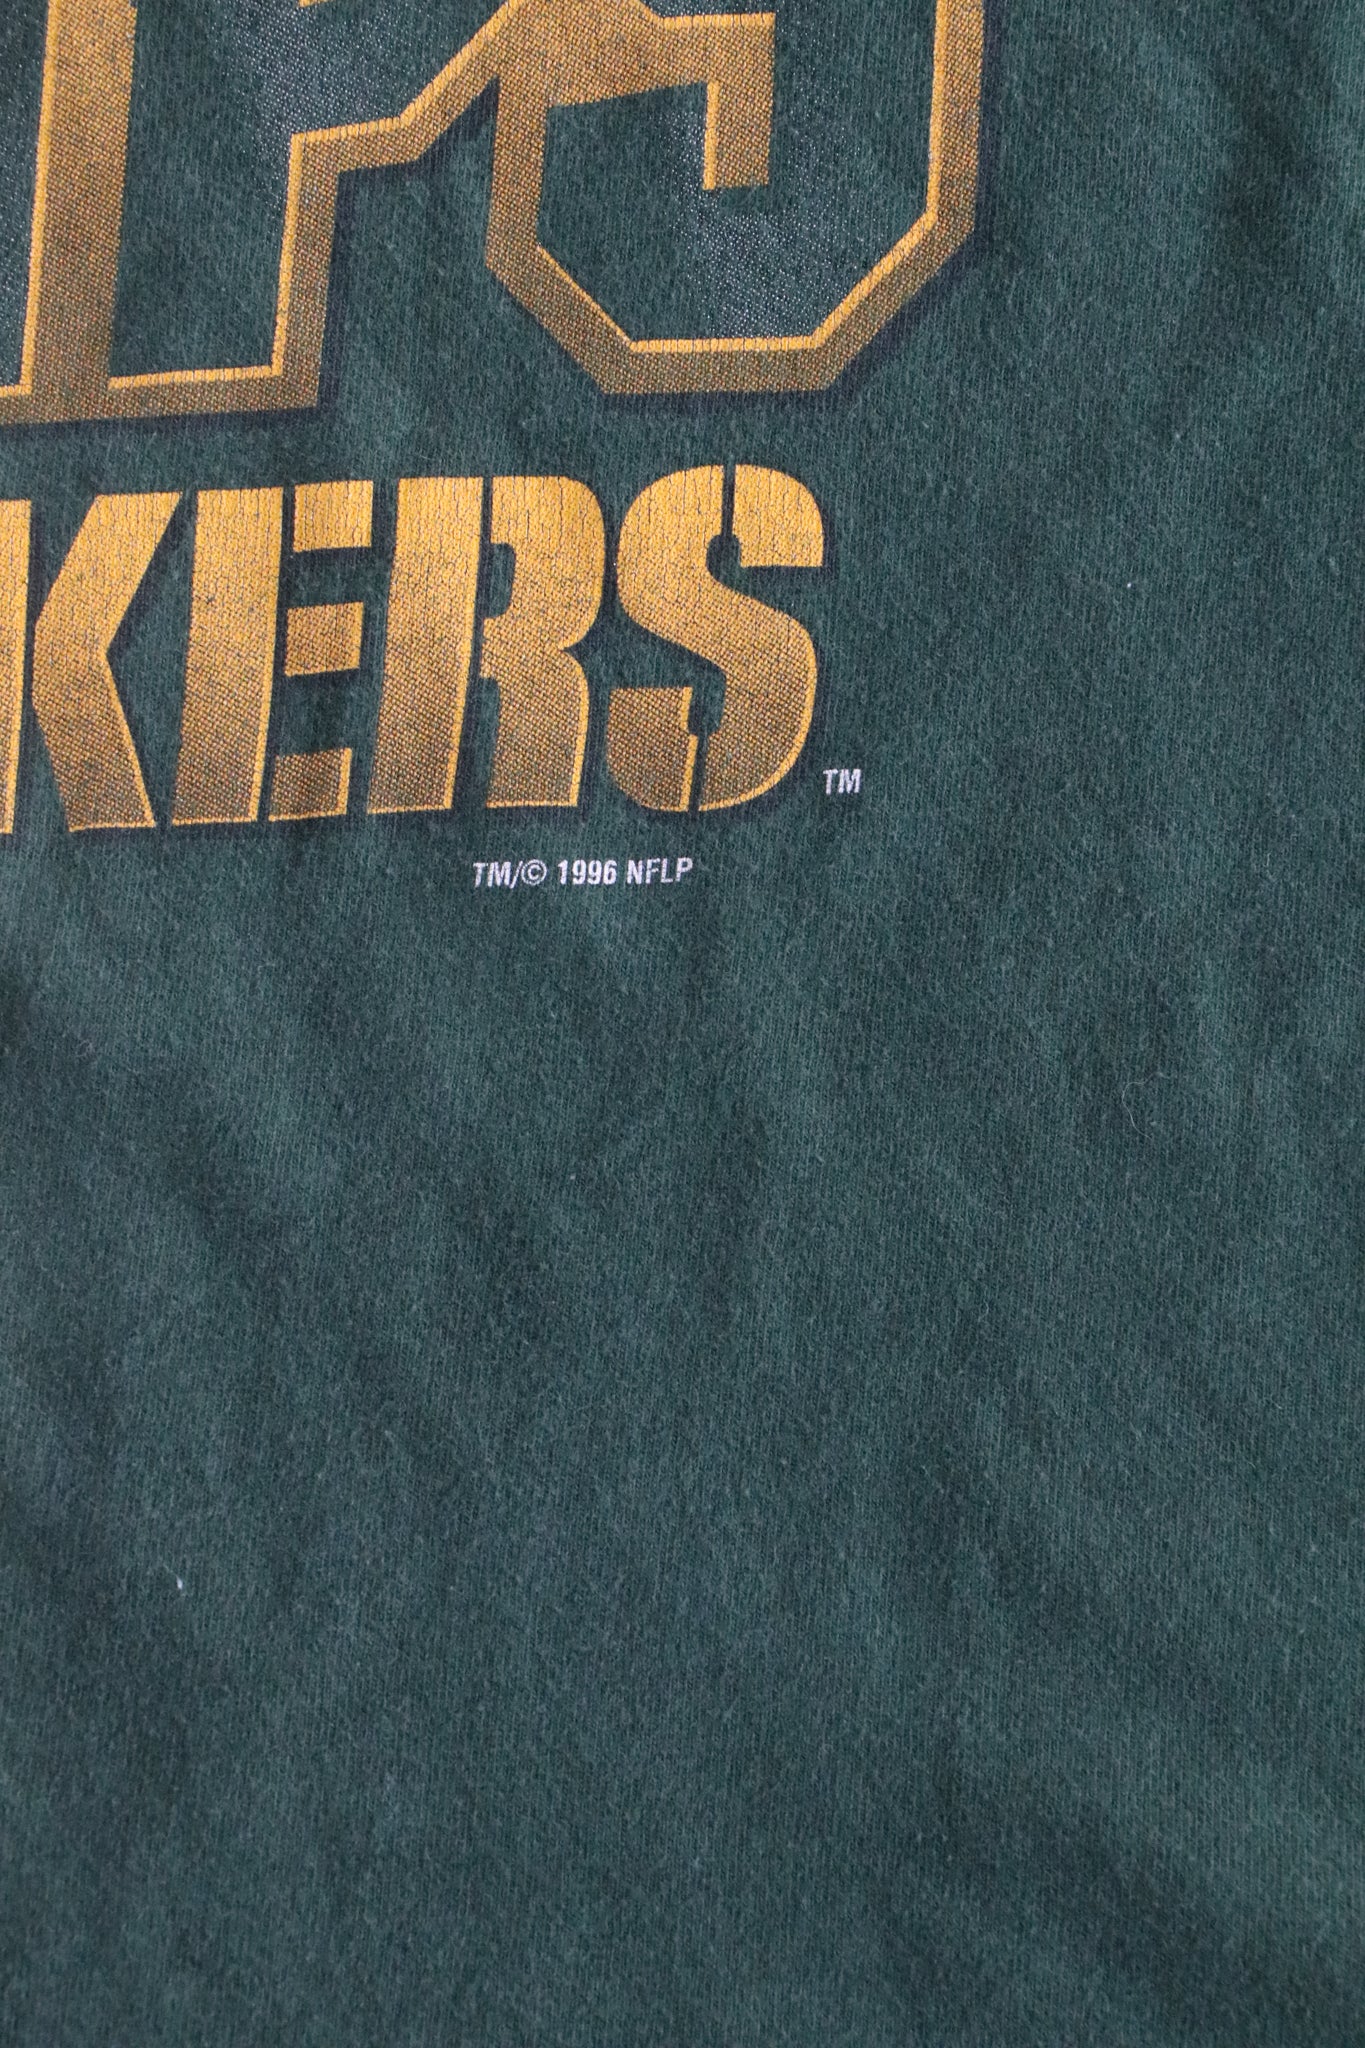 Vintage 1996 NFL Packers Champions Tee XL